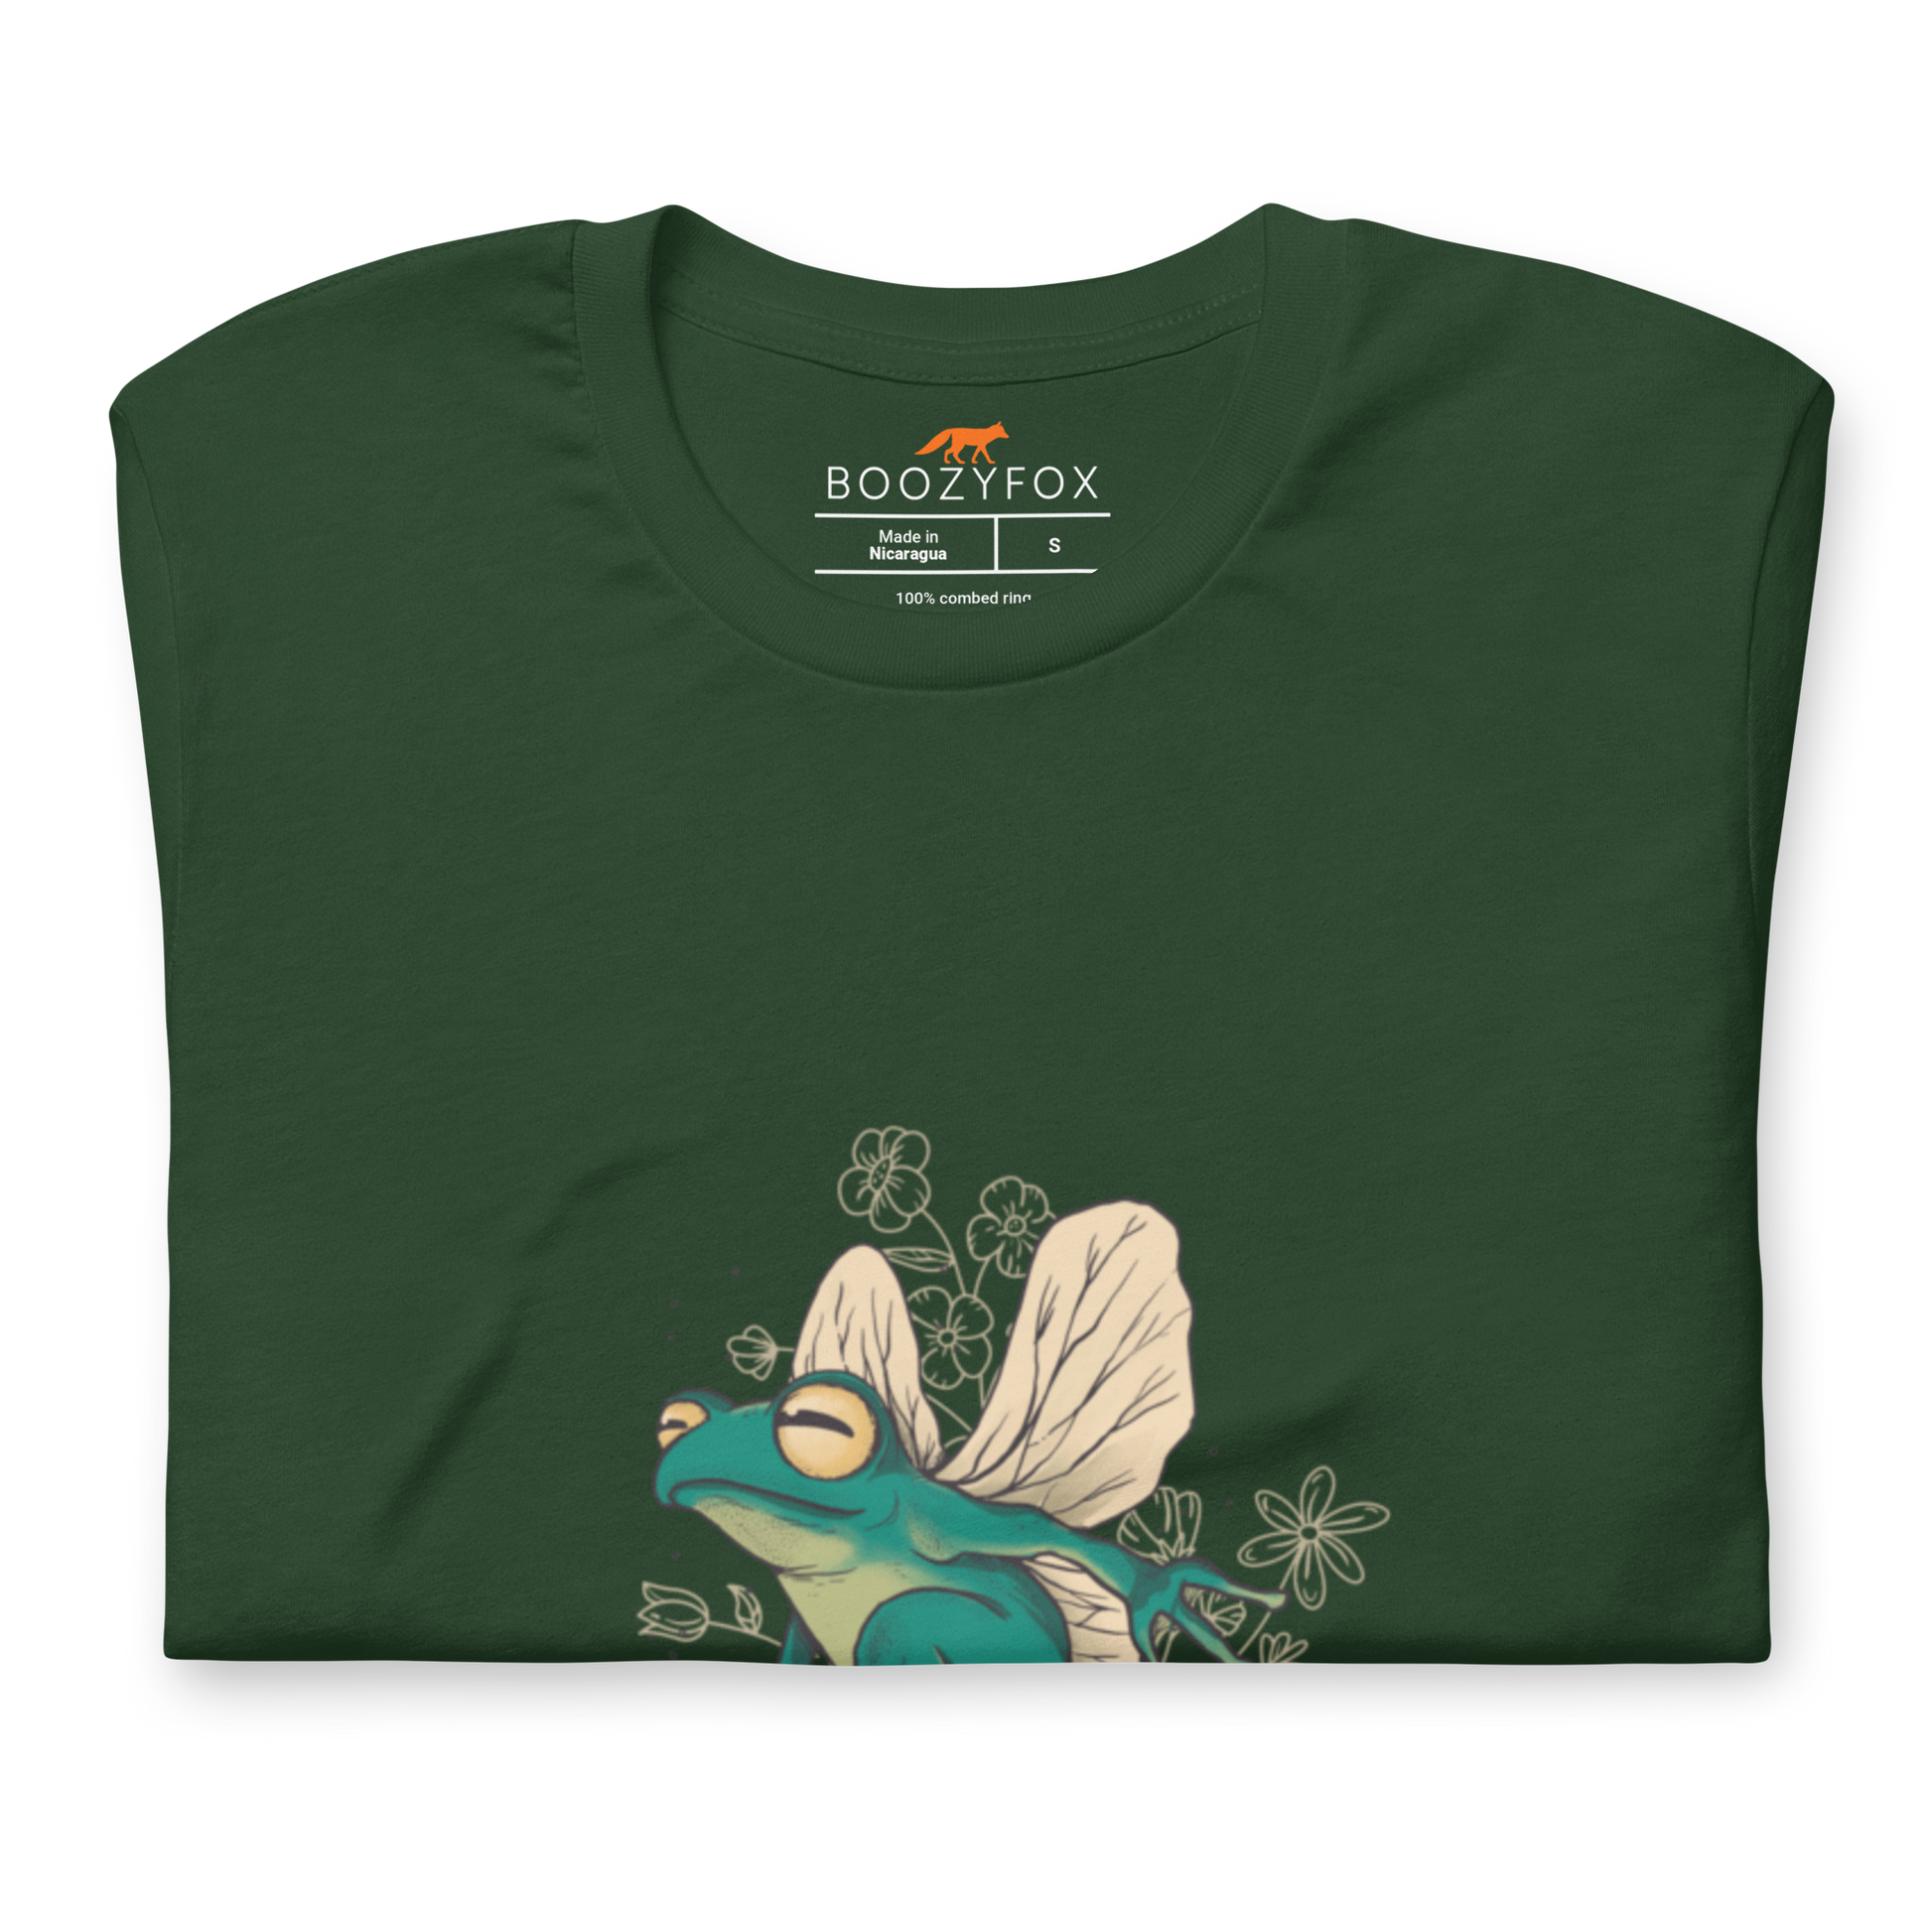 Front details of a Forest Green Premium Frog T-Shirt featuring an adorable Fairy Frog graphic on the chest - Funny Graphic Frog Tees - Boozy Fox